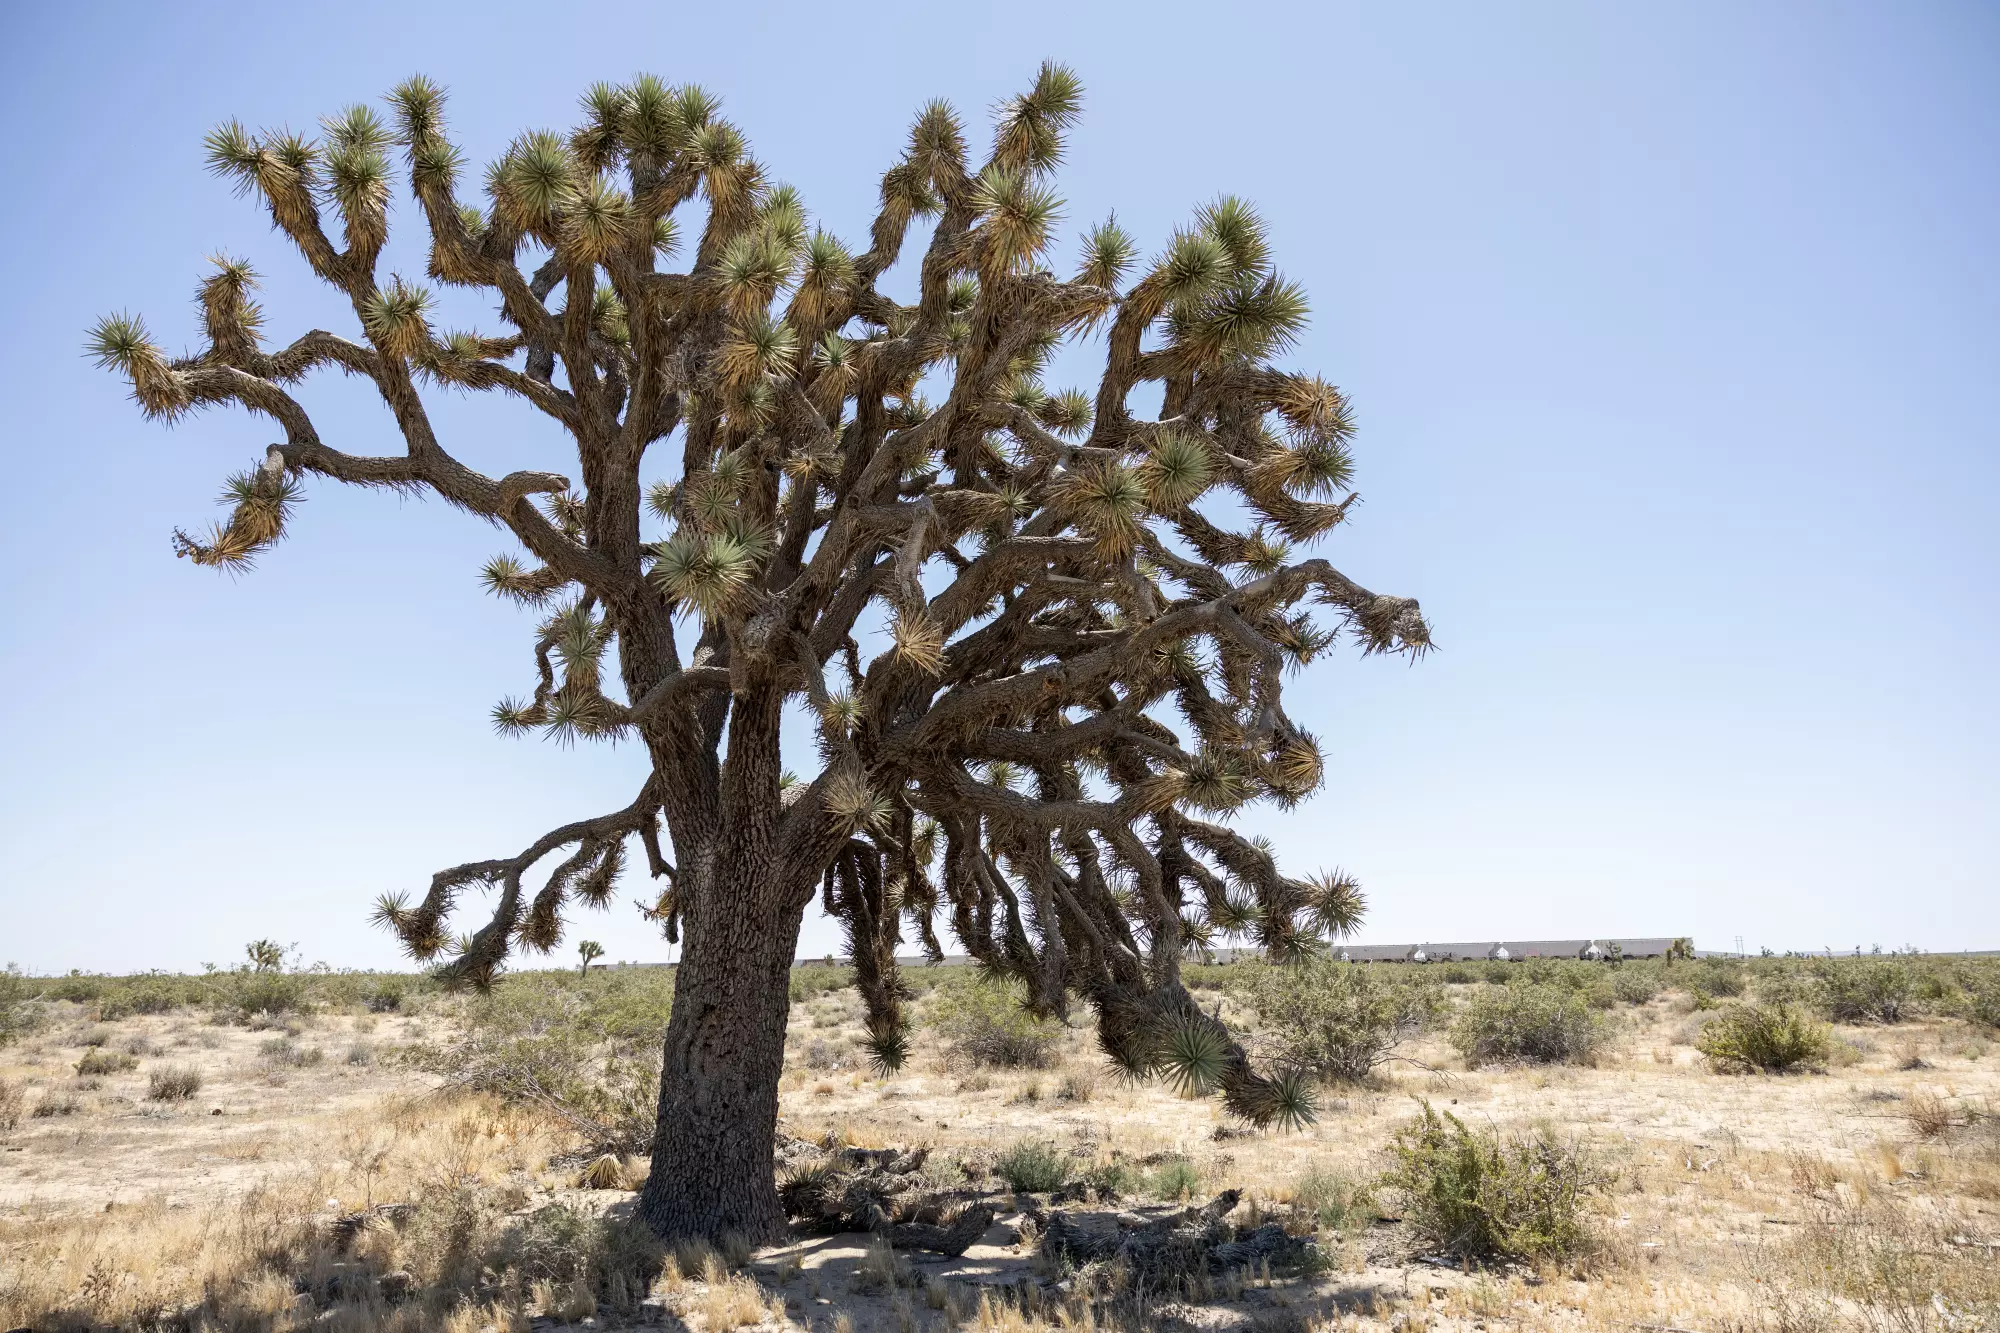 Joshua trees, such as this 25-foot-tall specimen that is 150 to 200 years old, are threatened with removal for a solar project in Boron by Avantus, a California company that is mostly owned by KKR, the global private equity firm. Thousands of protected Joshua trees just outside this desert town, including many thought to be a century old, will be cut down to make way for the sprawling solar project. Residents worry that construction dust will spread valley fever. Photo: Myung J. Chun / Los Angeles Times